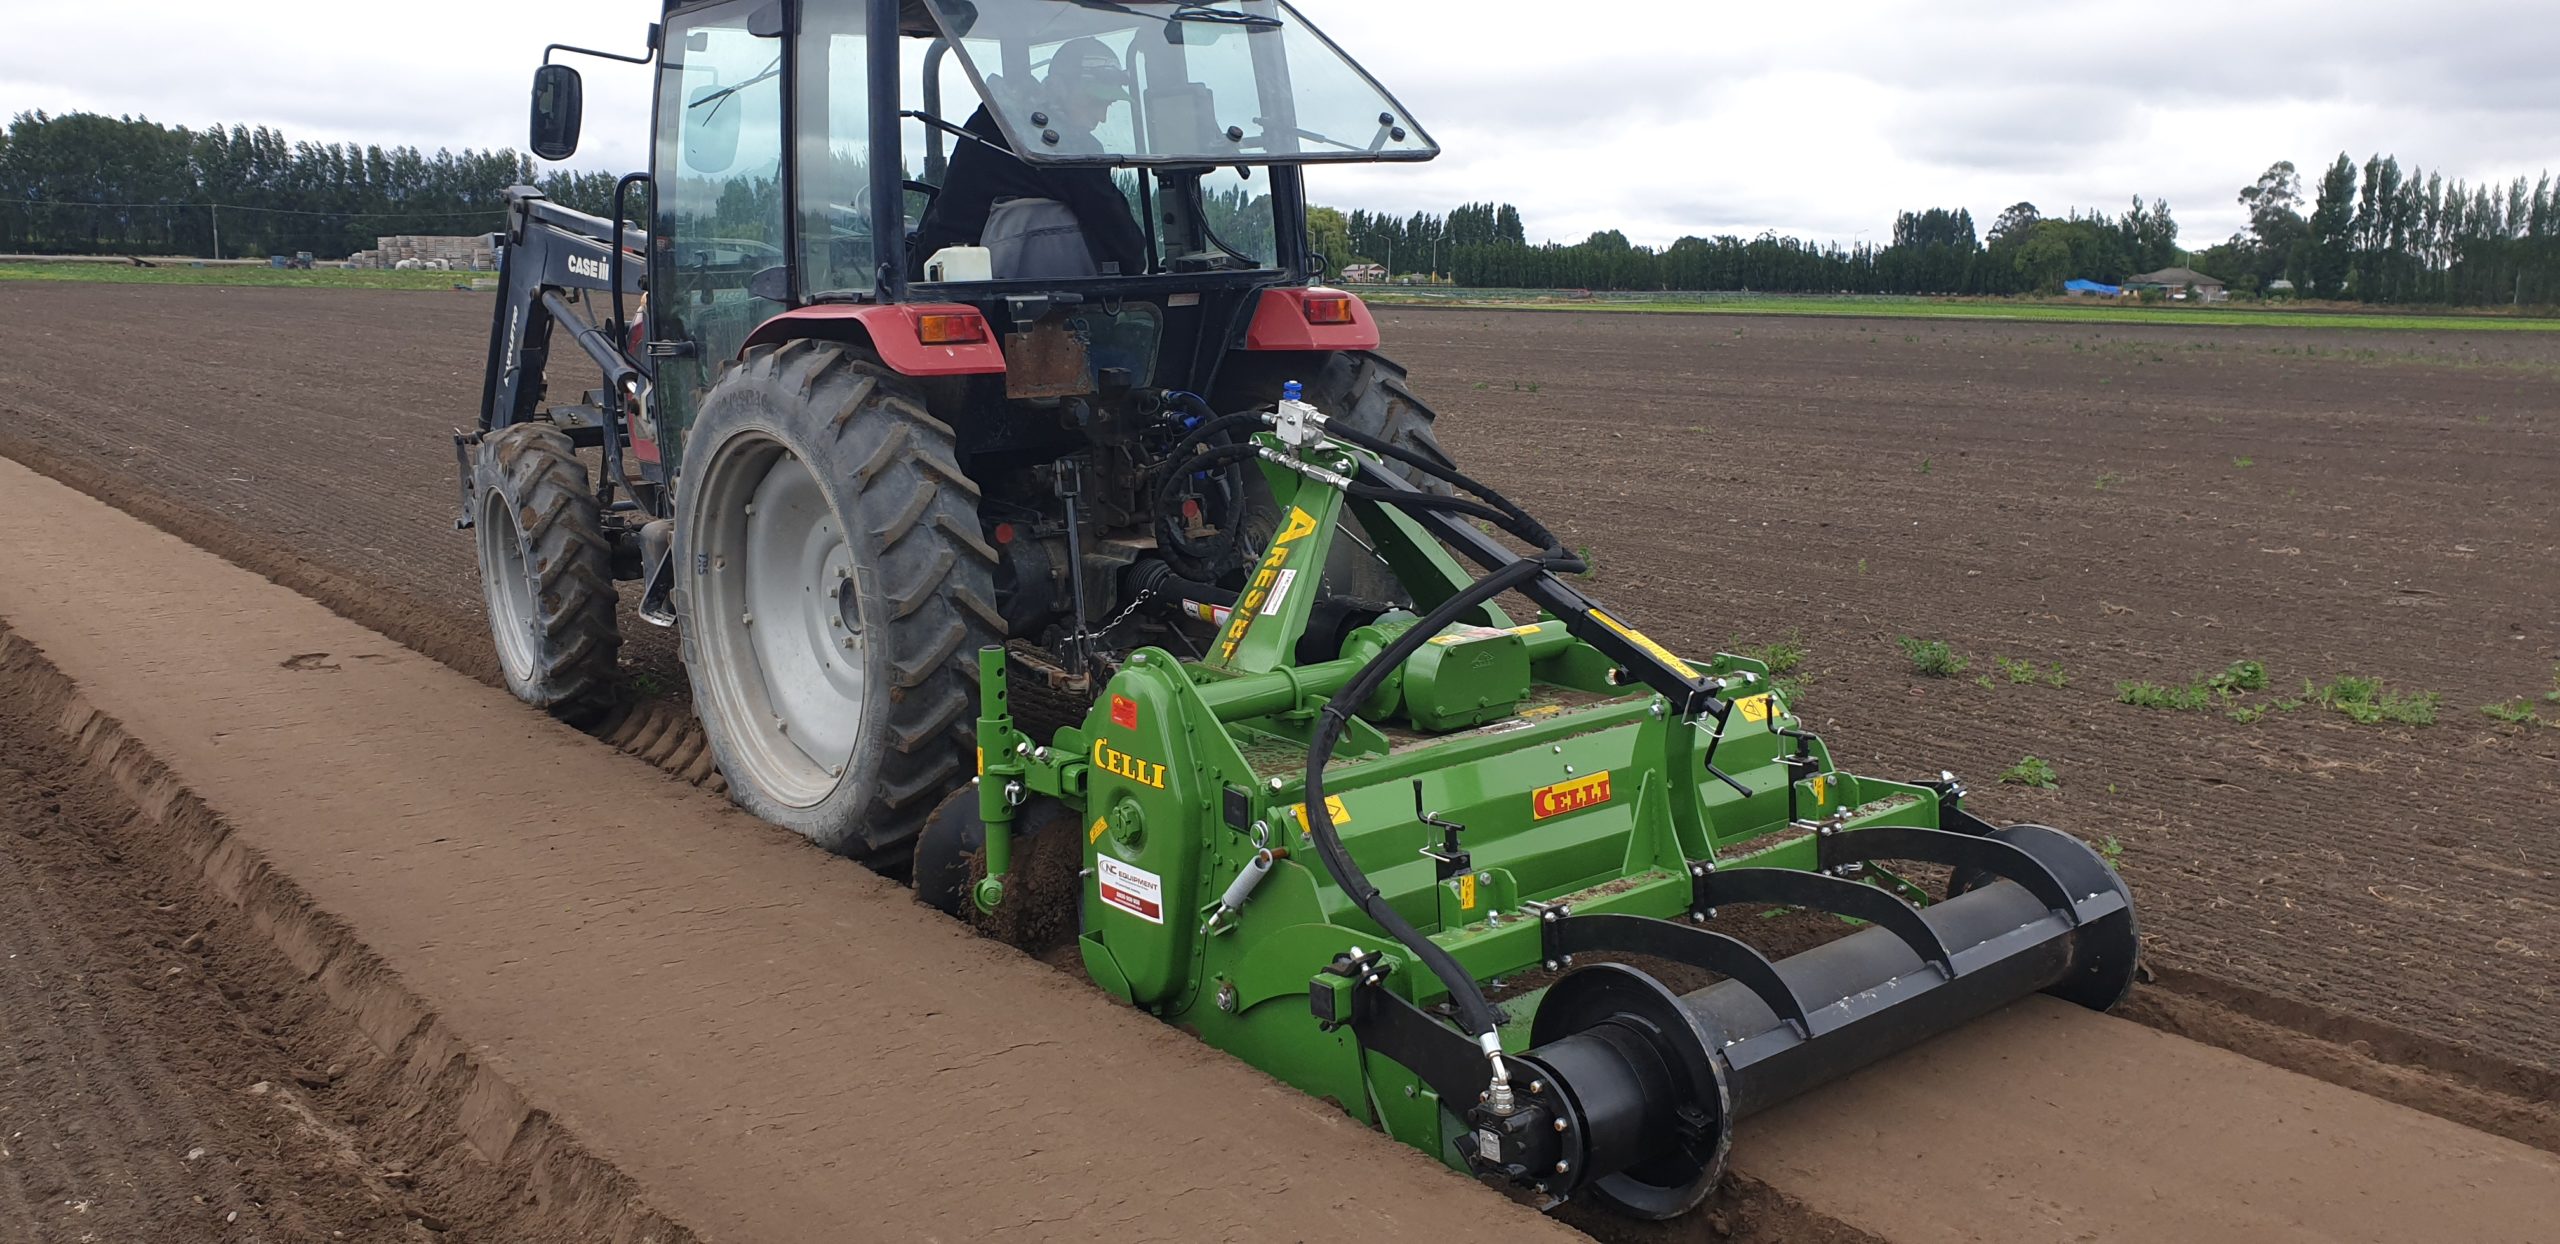 Celli bed former rotary hoe for vegetable bed forming with hydraulic motorised rear roller. Available from NC Equipment